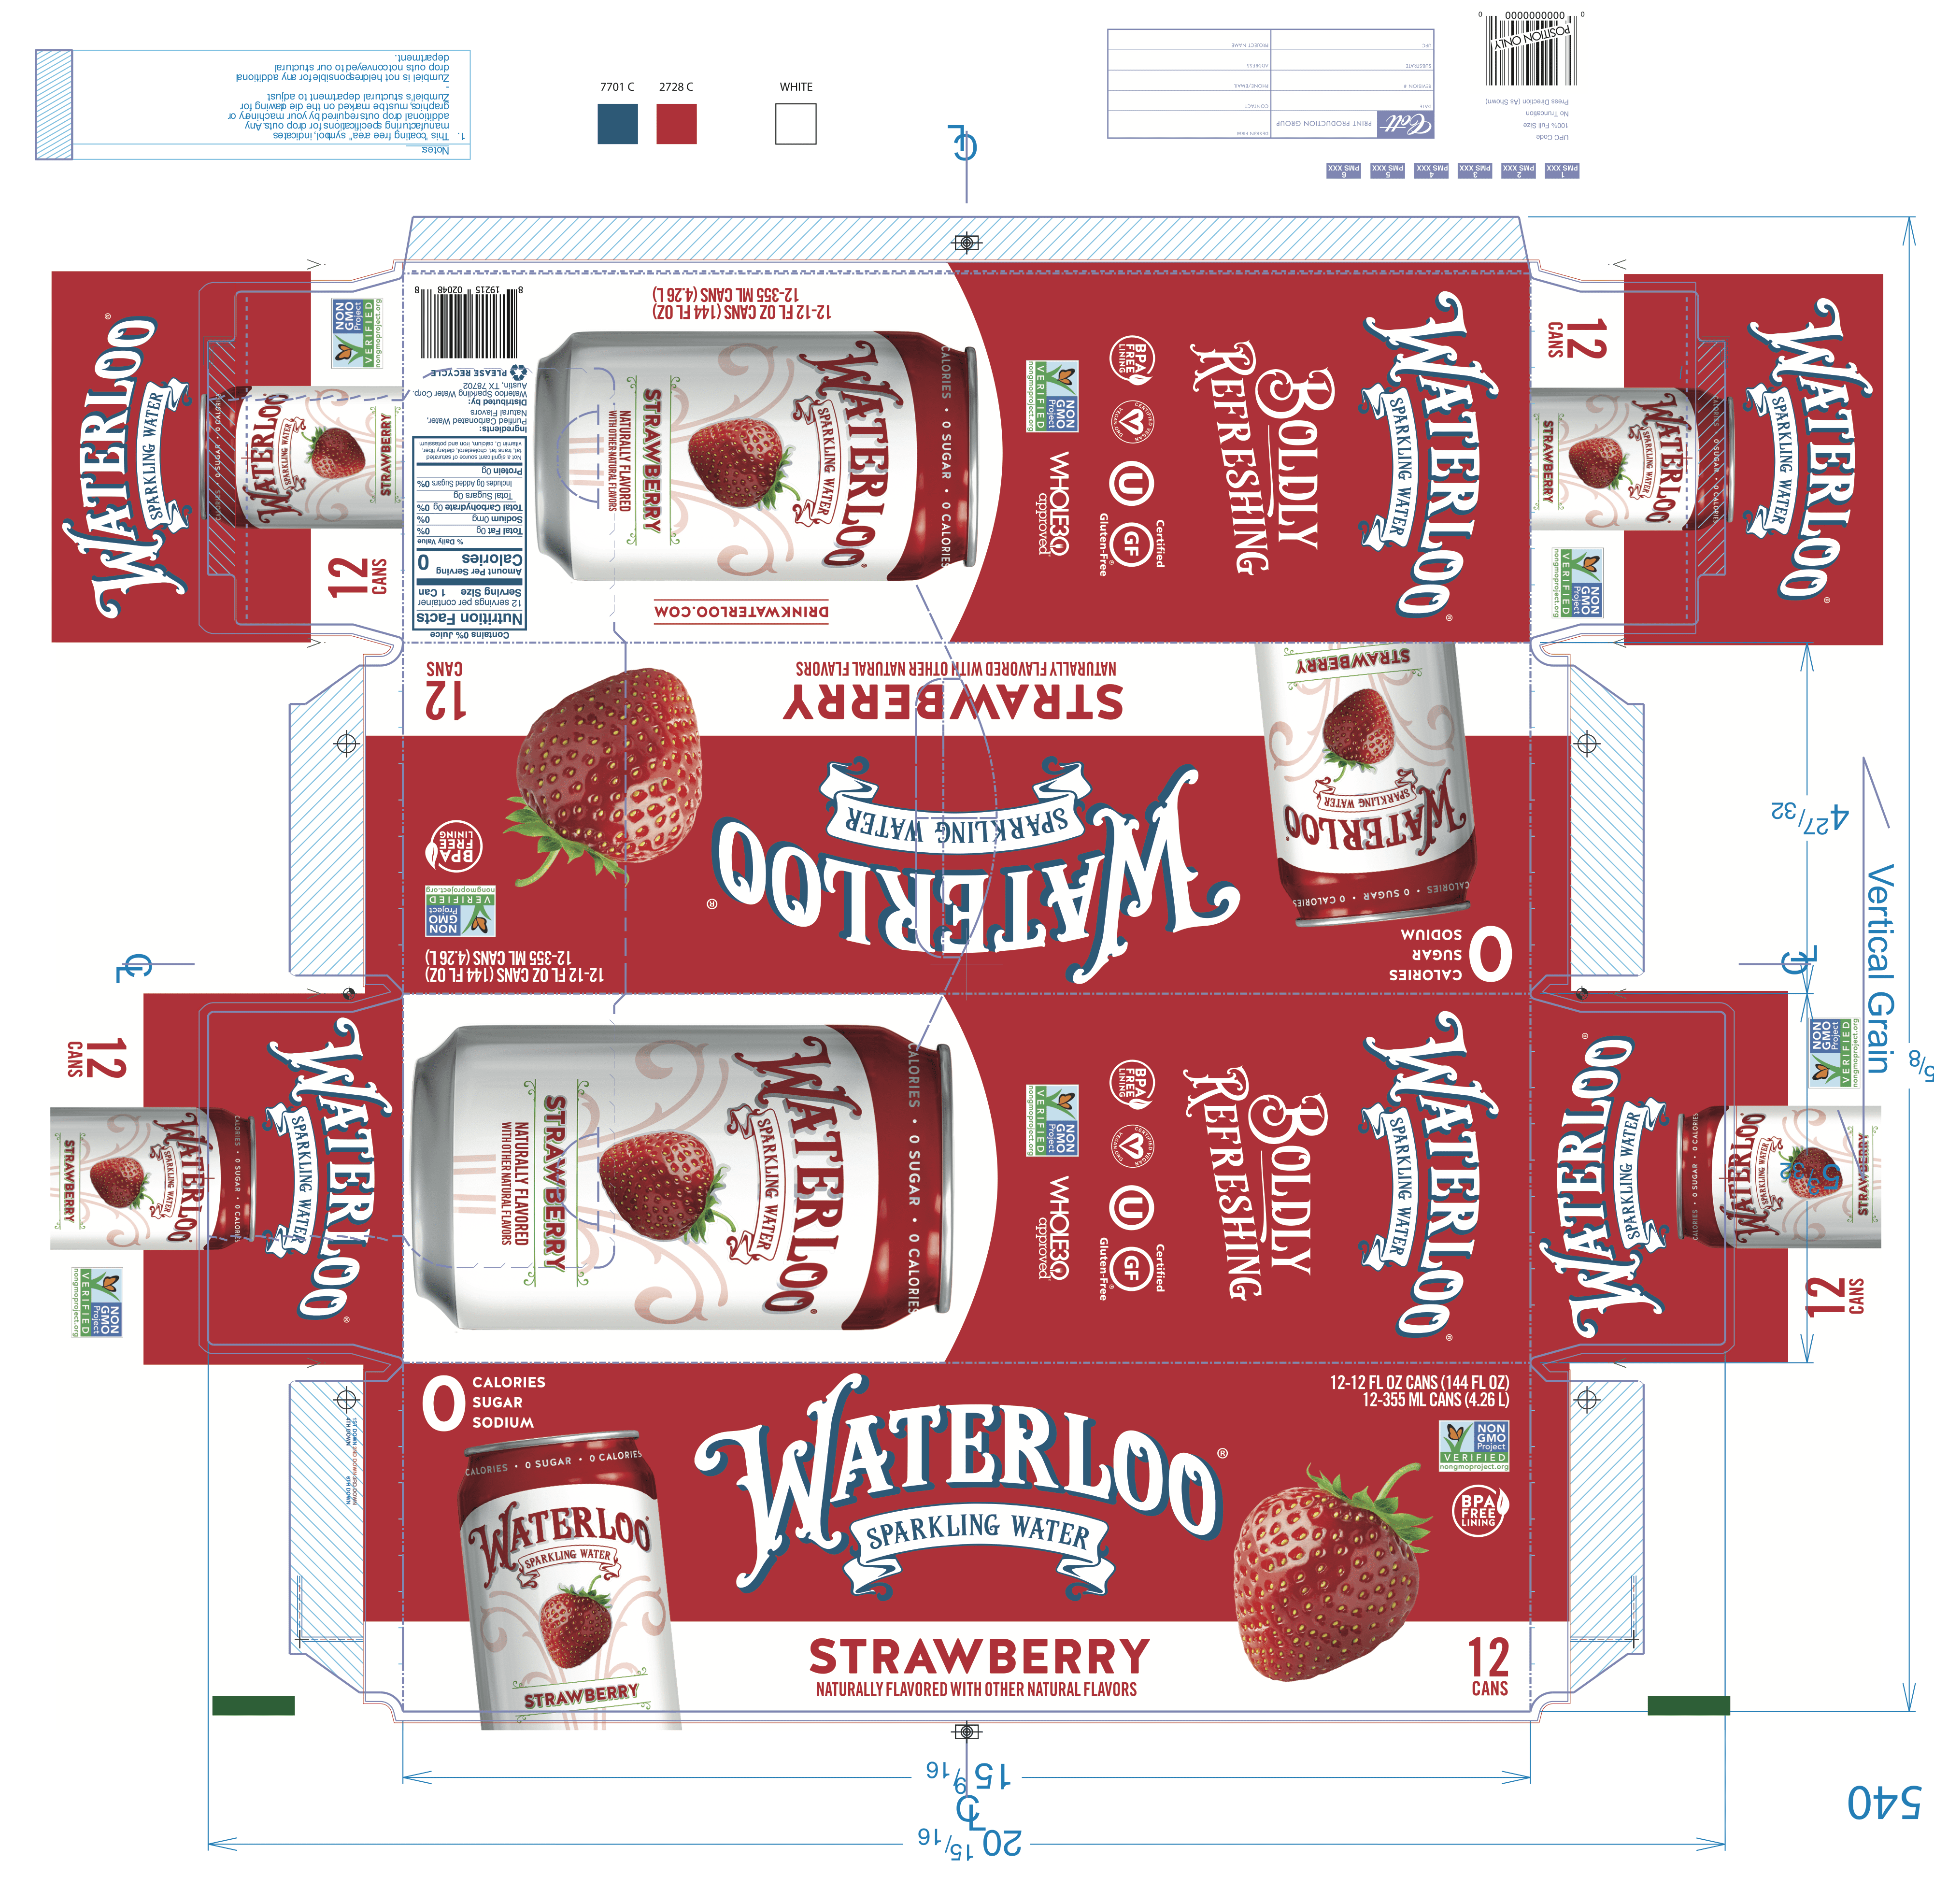 Waterloo Strawberry Sparkling Water 2 innerpacks per case 144.0 fl Product Label